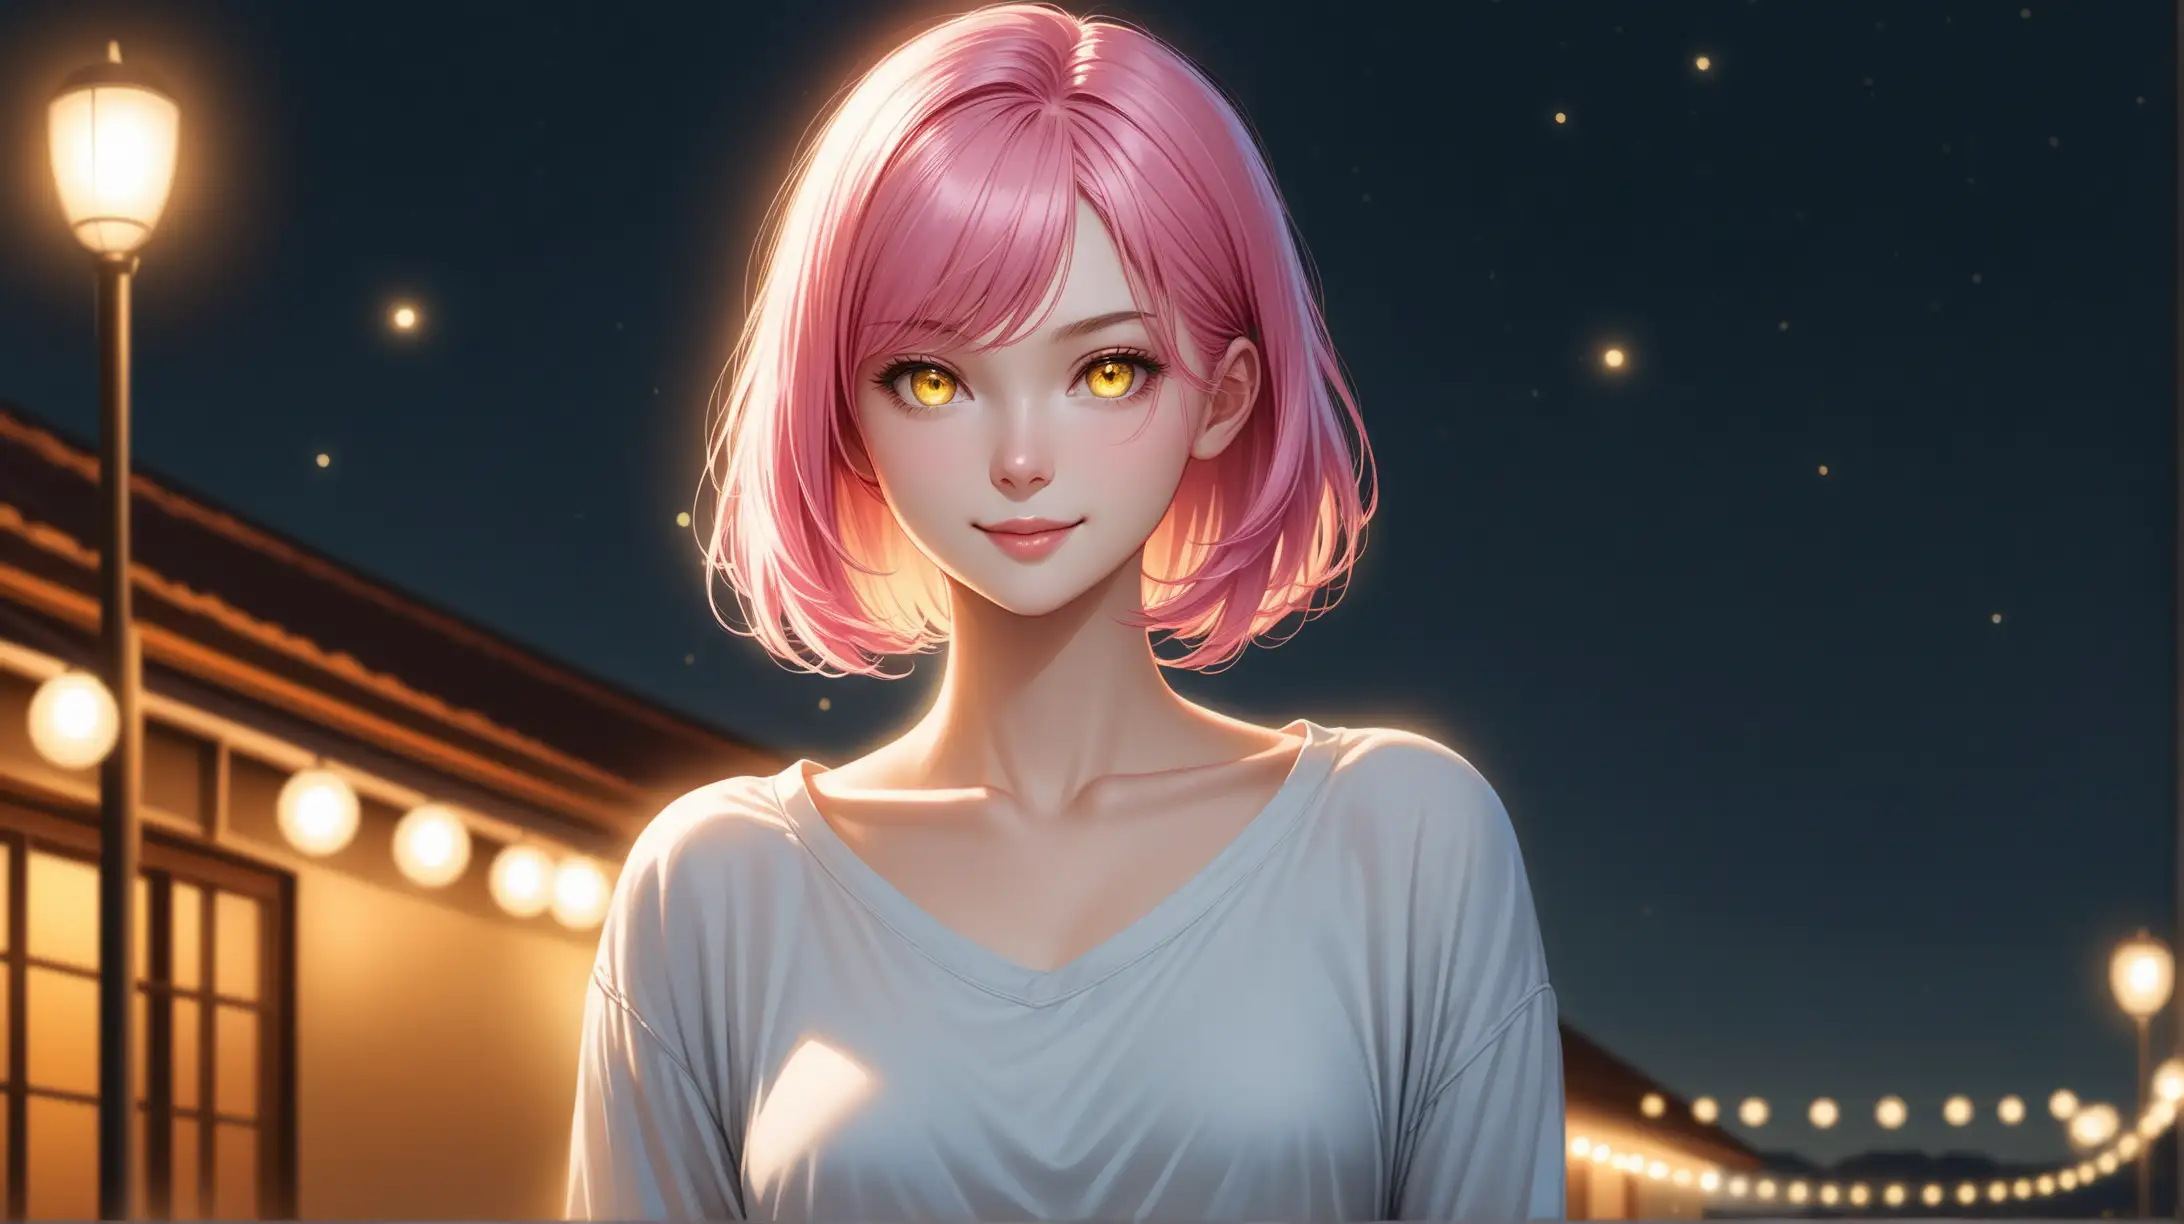 Seductive Woman with Pink Hair Smiling Outdoors at Night